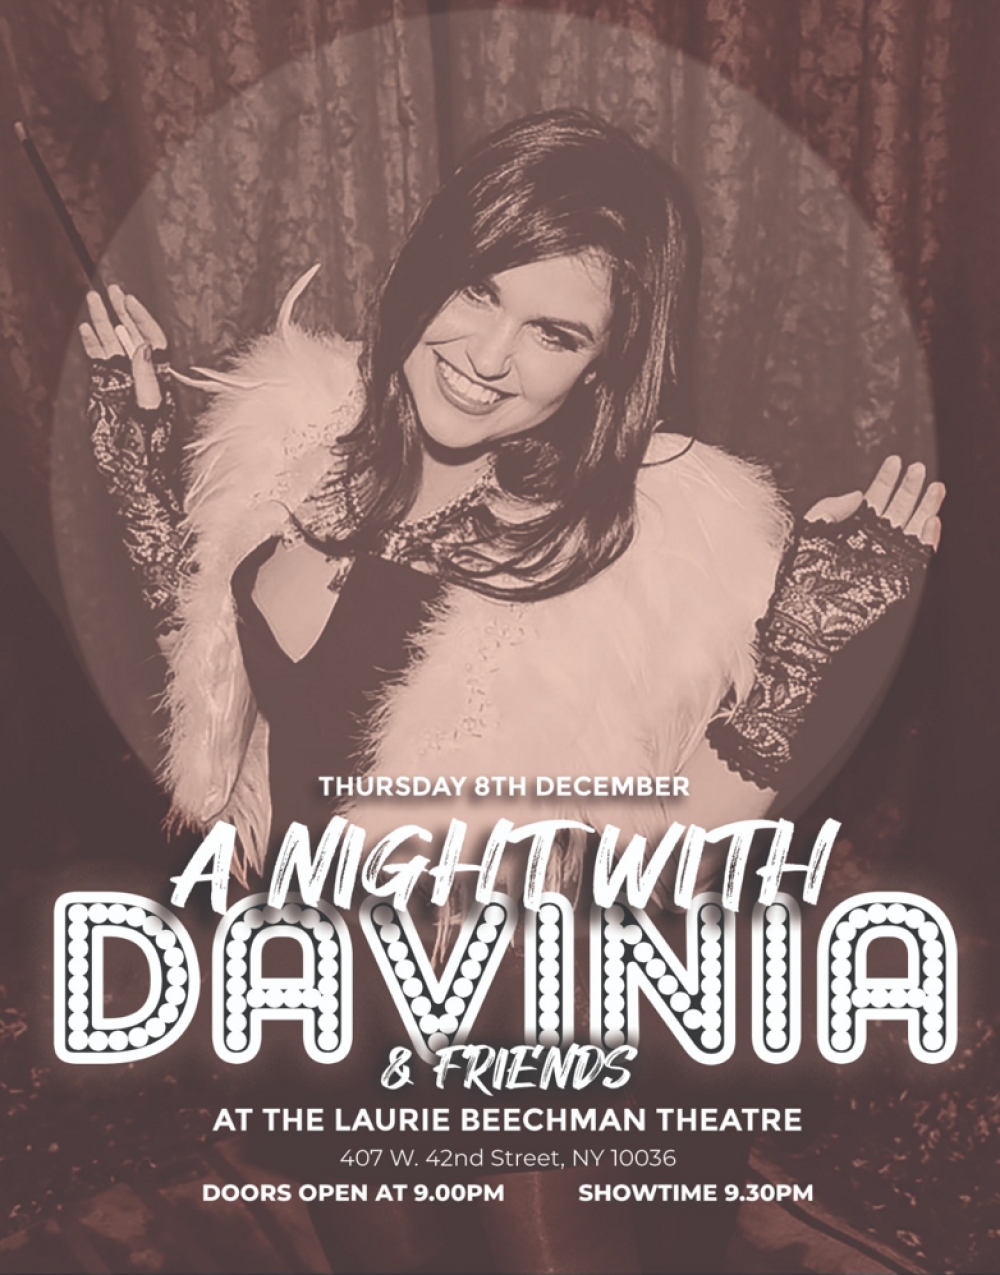 A Night with Davinia & Friends at The Laurie Beechman Theatre